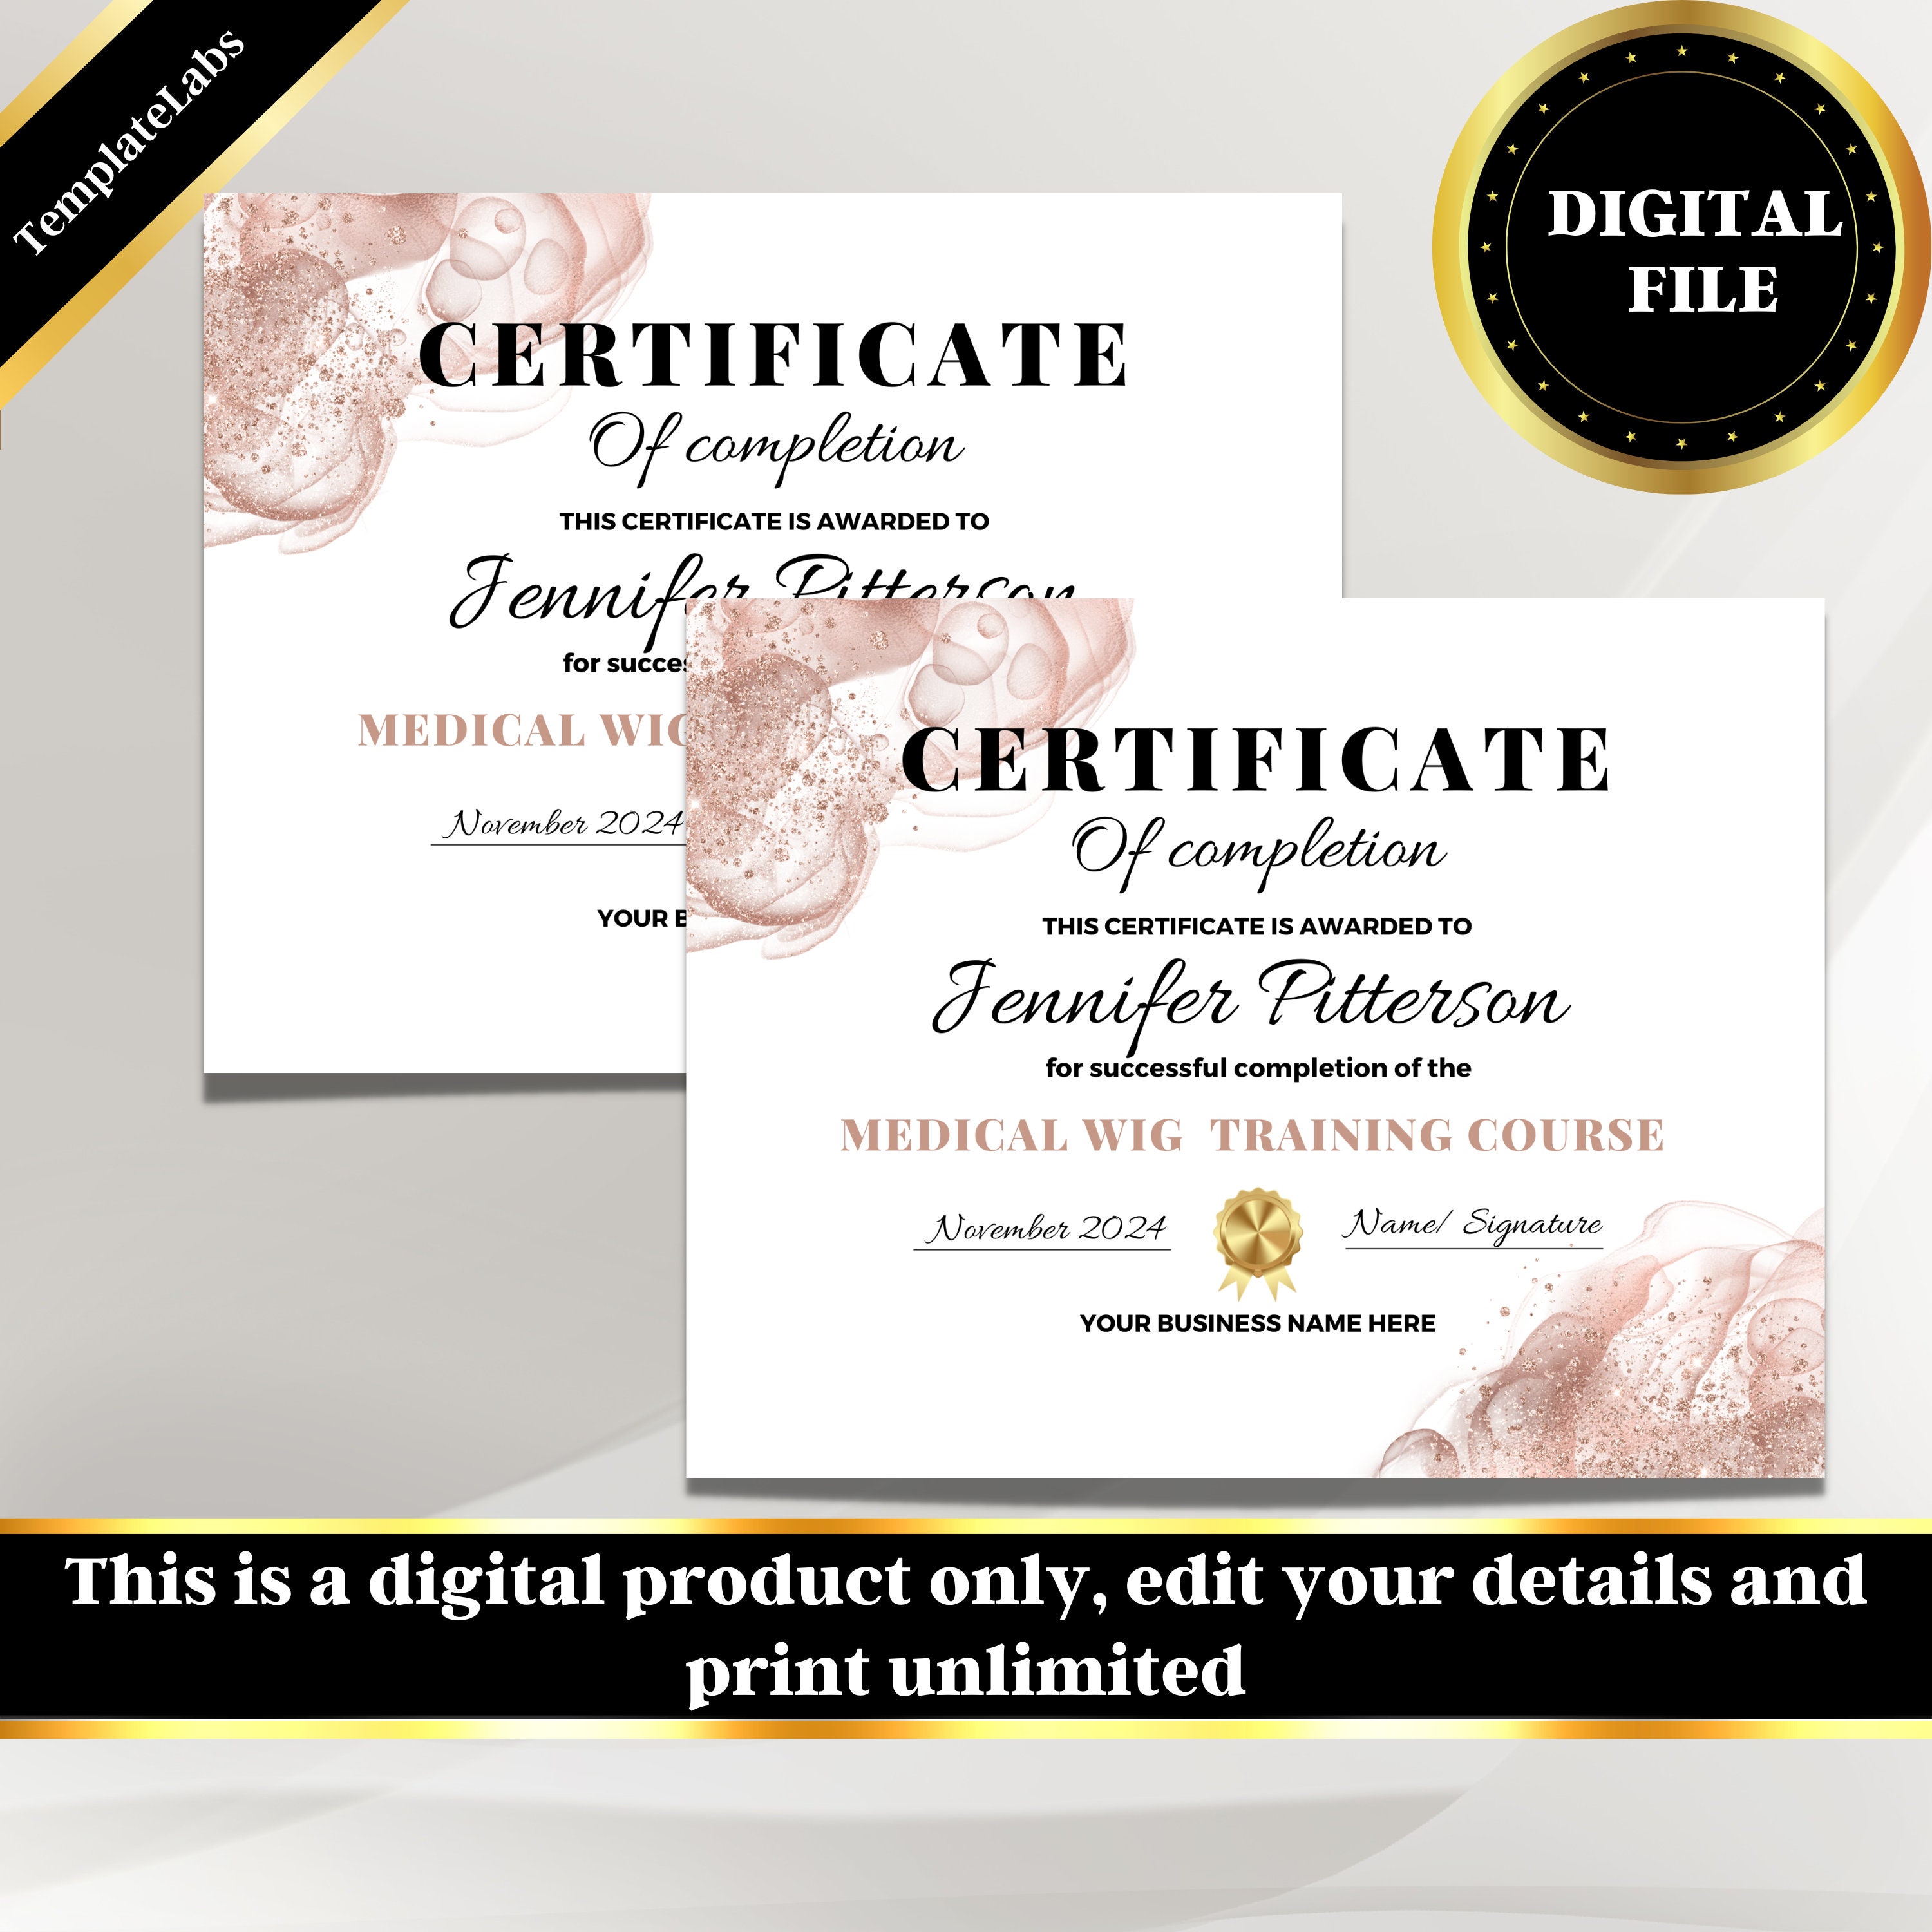 Hairlaya Hand Tied Online Certification Course with Toolkit